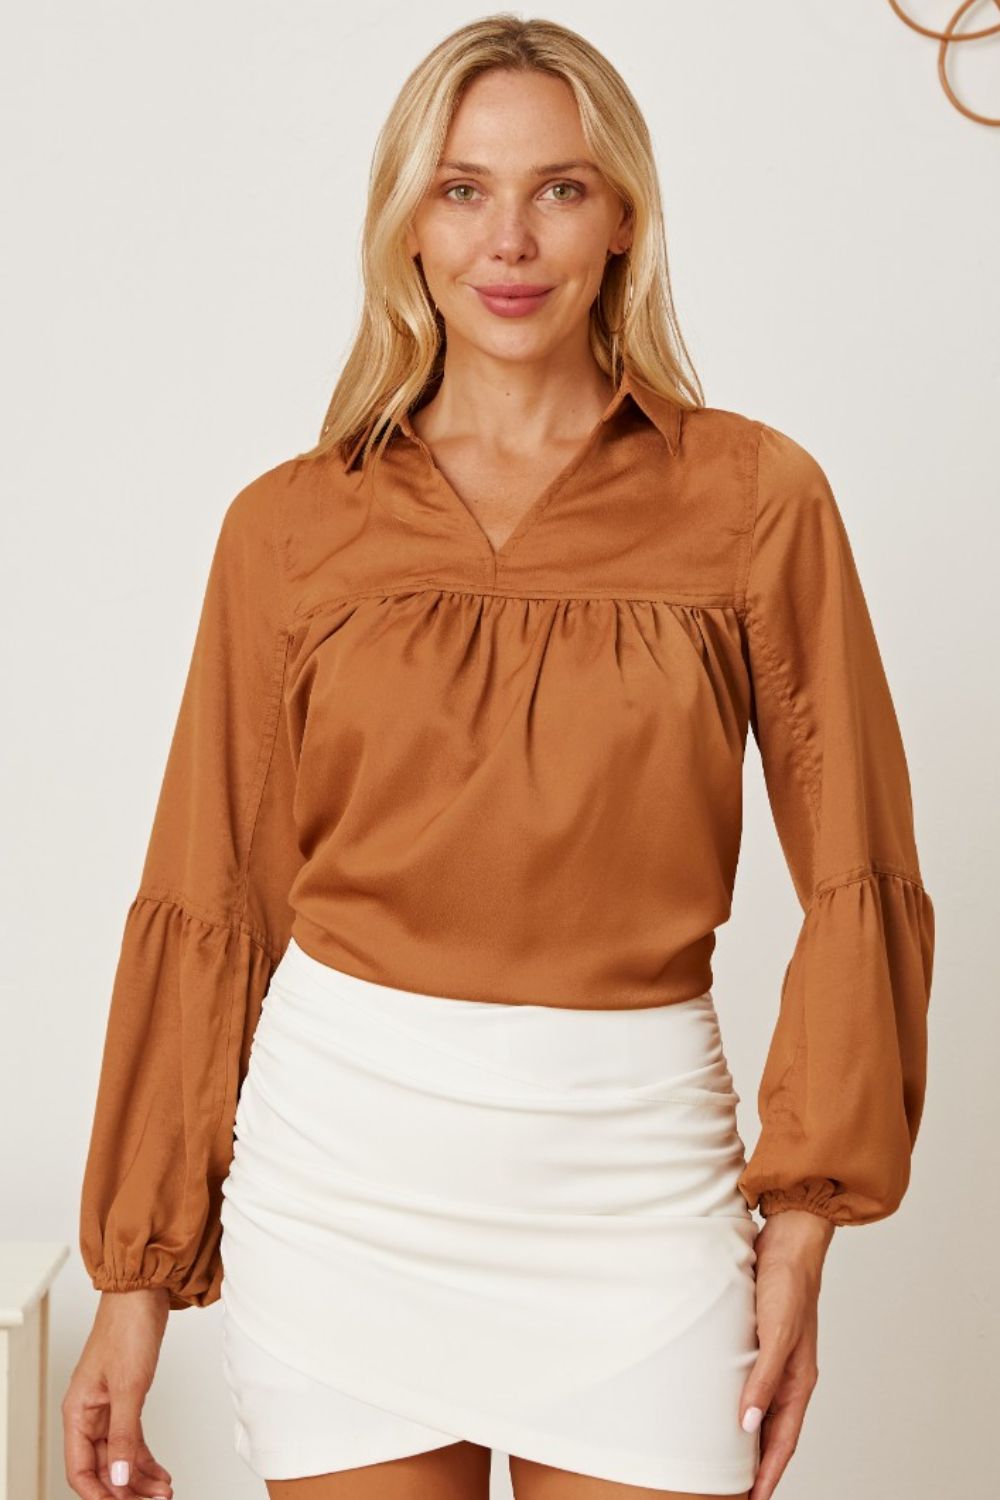 Balloon Sleeve Collared Neck Blouse - Khaki / S - Women’s Clothing & Accessories - Shirts & Tops - 1 - 2024